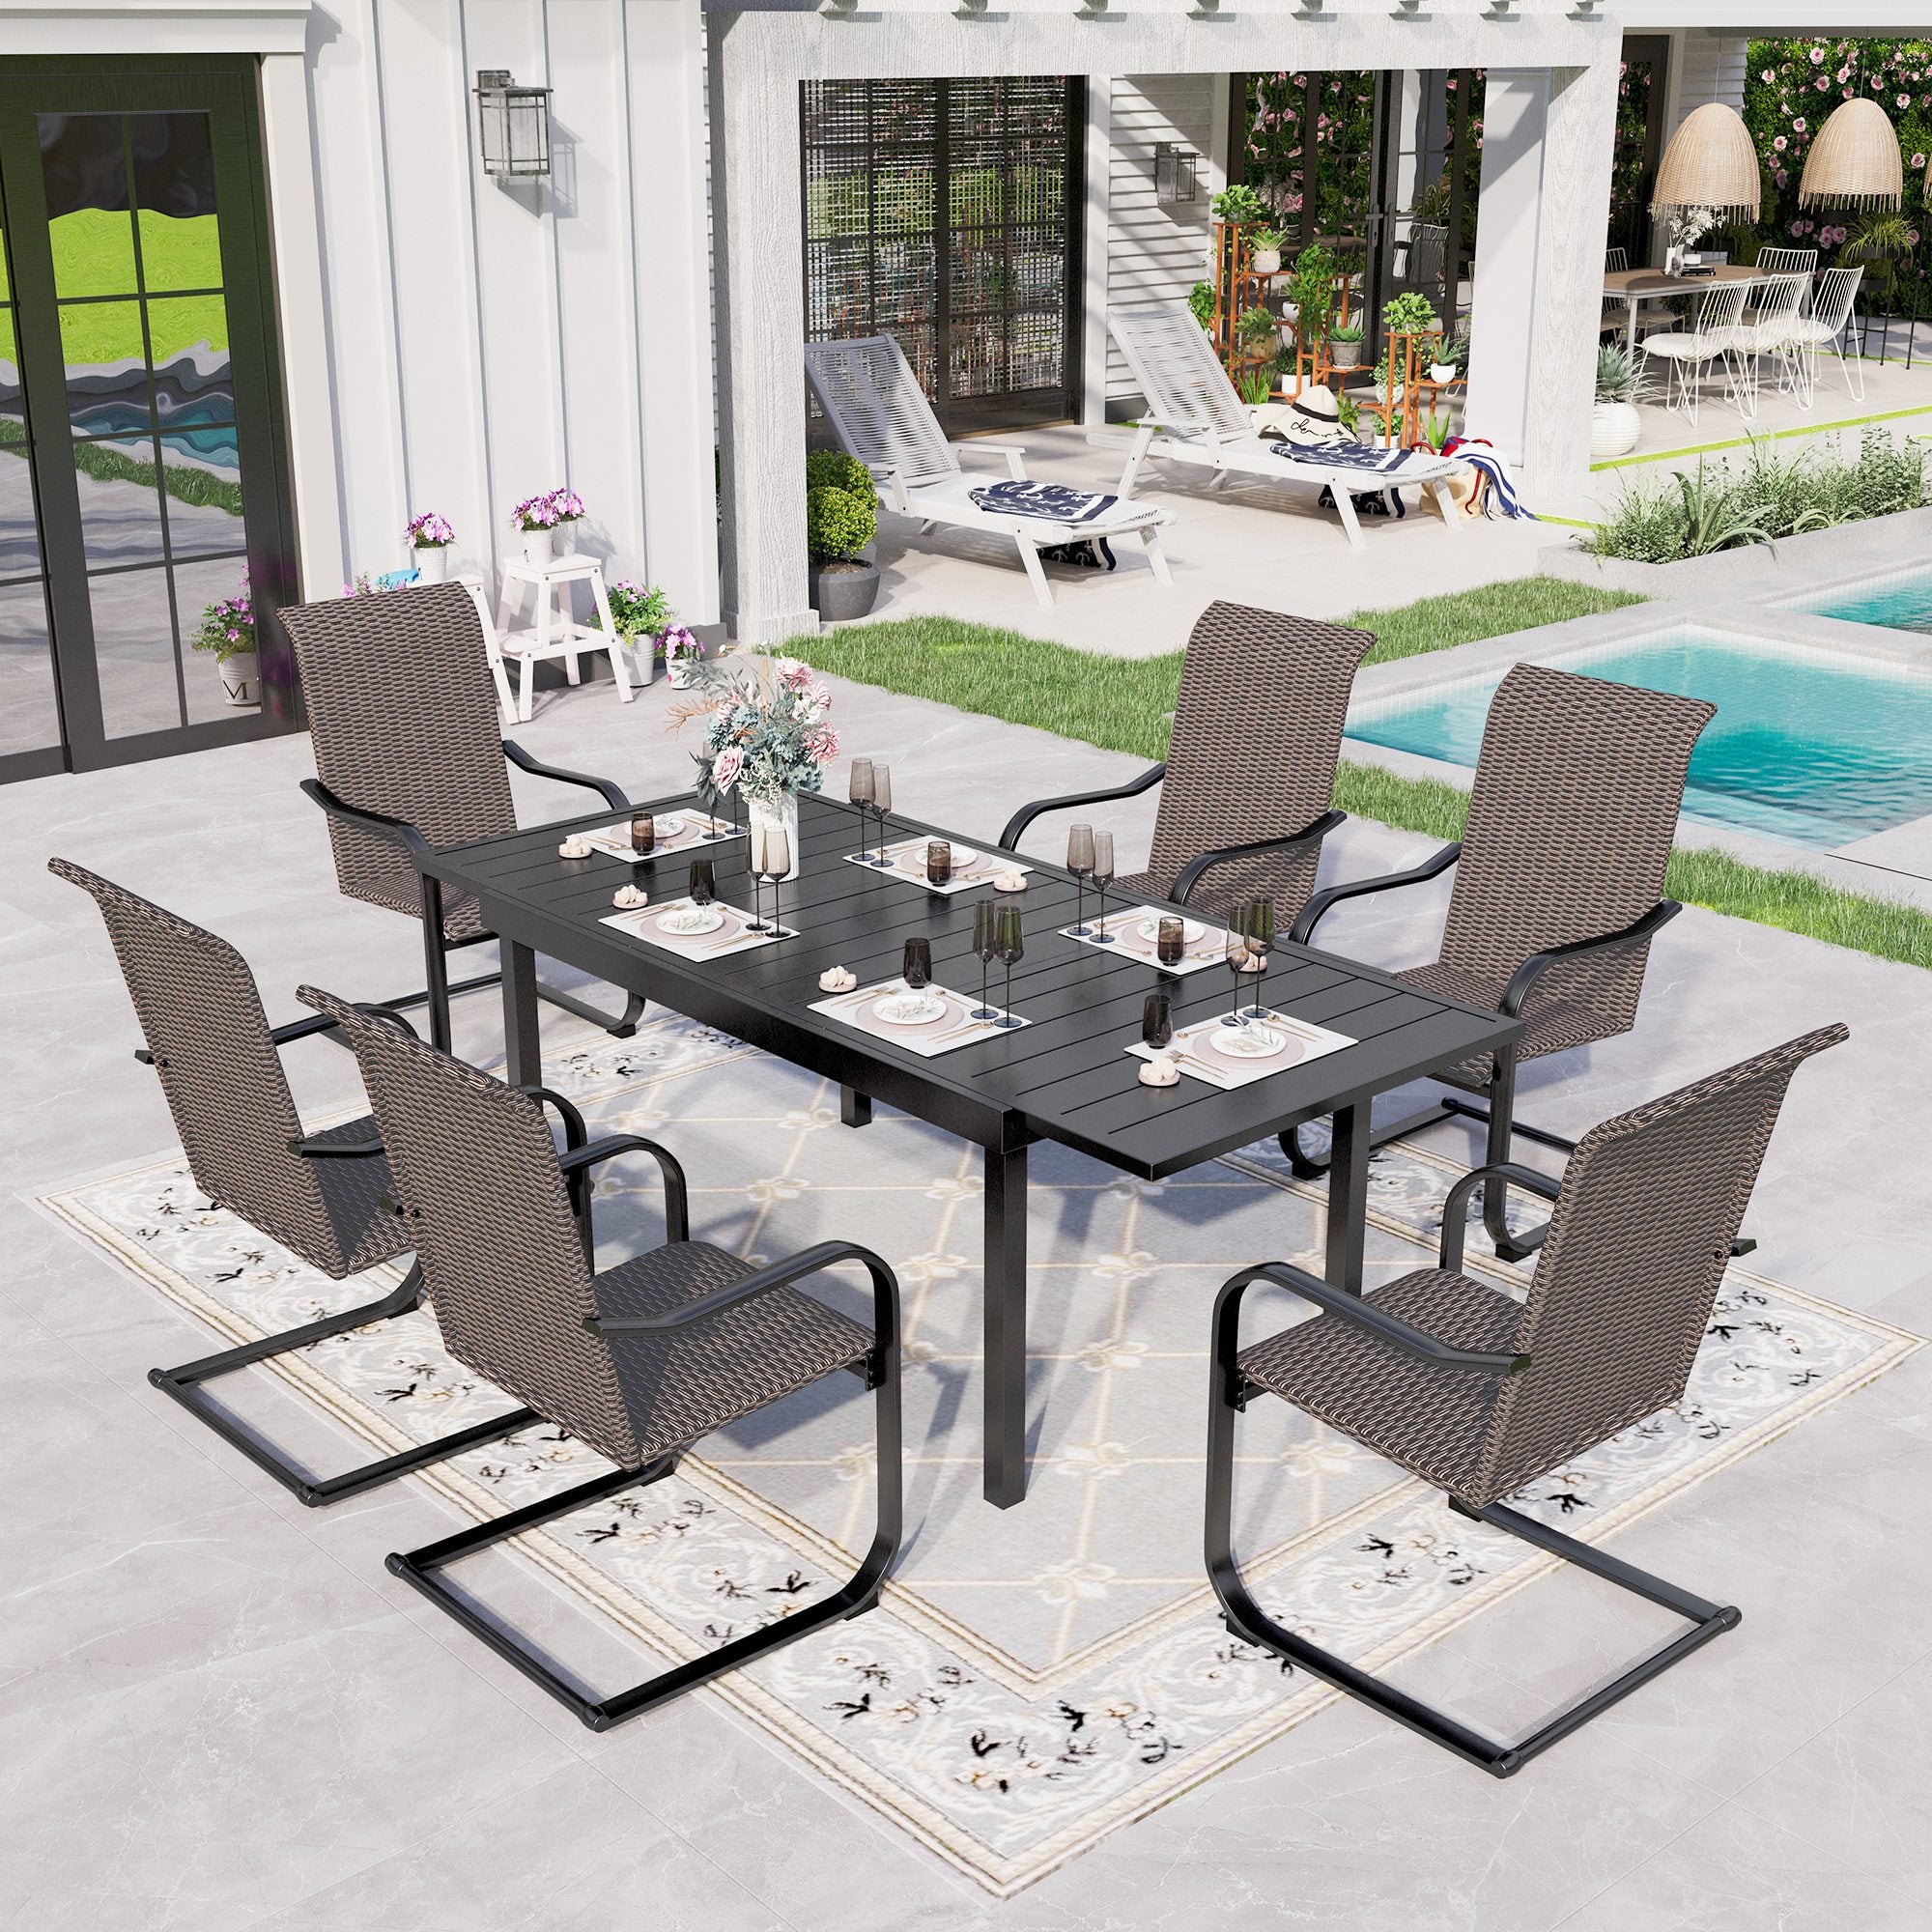 Sophia & William 7 Piece Outdoor Patio Dinning Set Wicker Chairs and Extendable Table Set - image 1 of 8